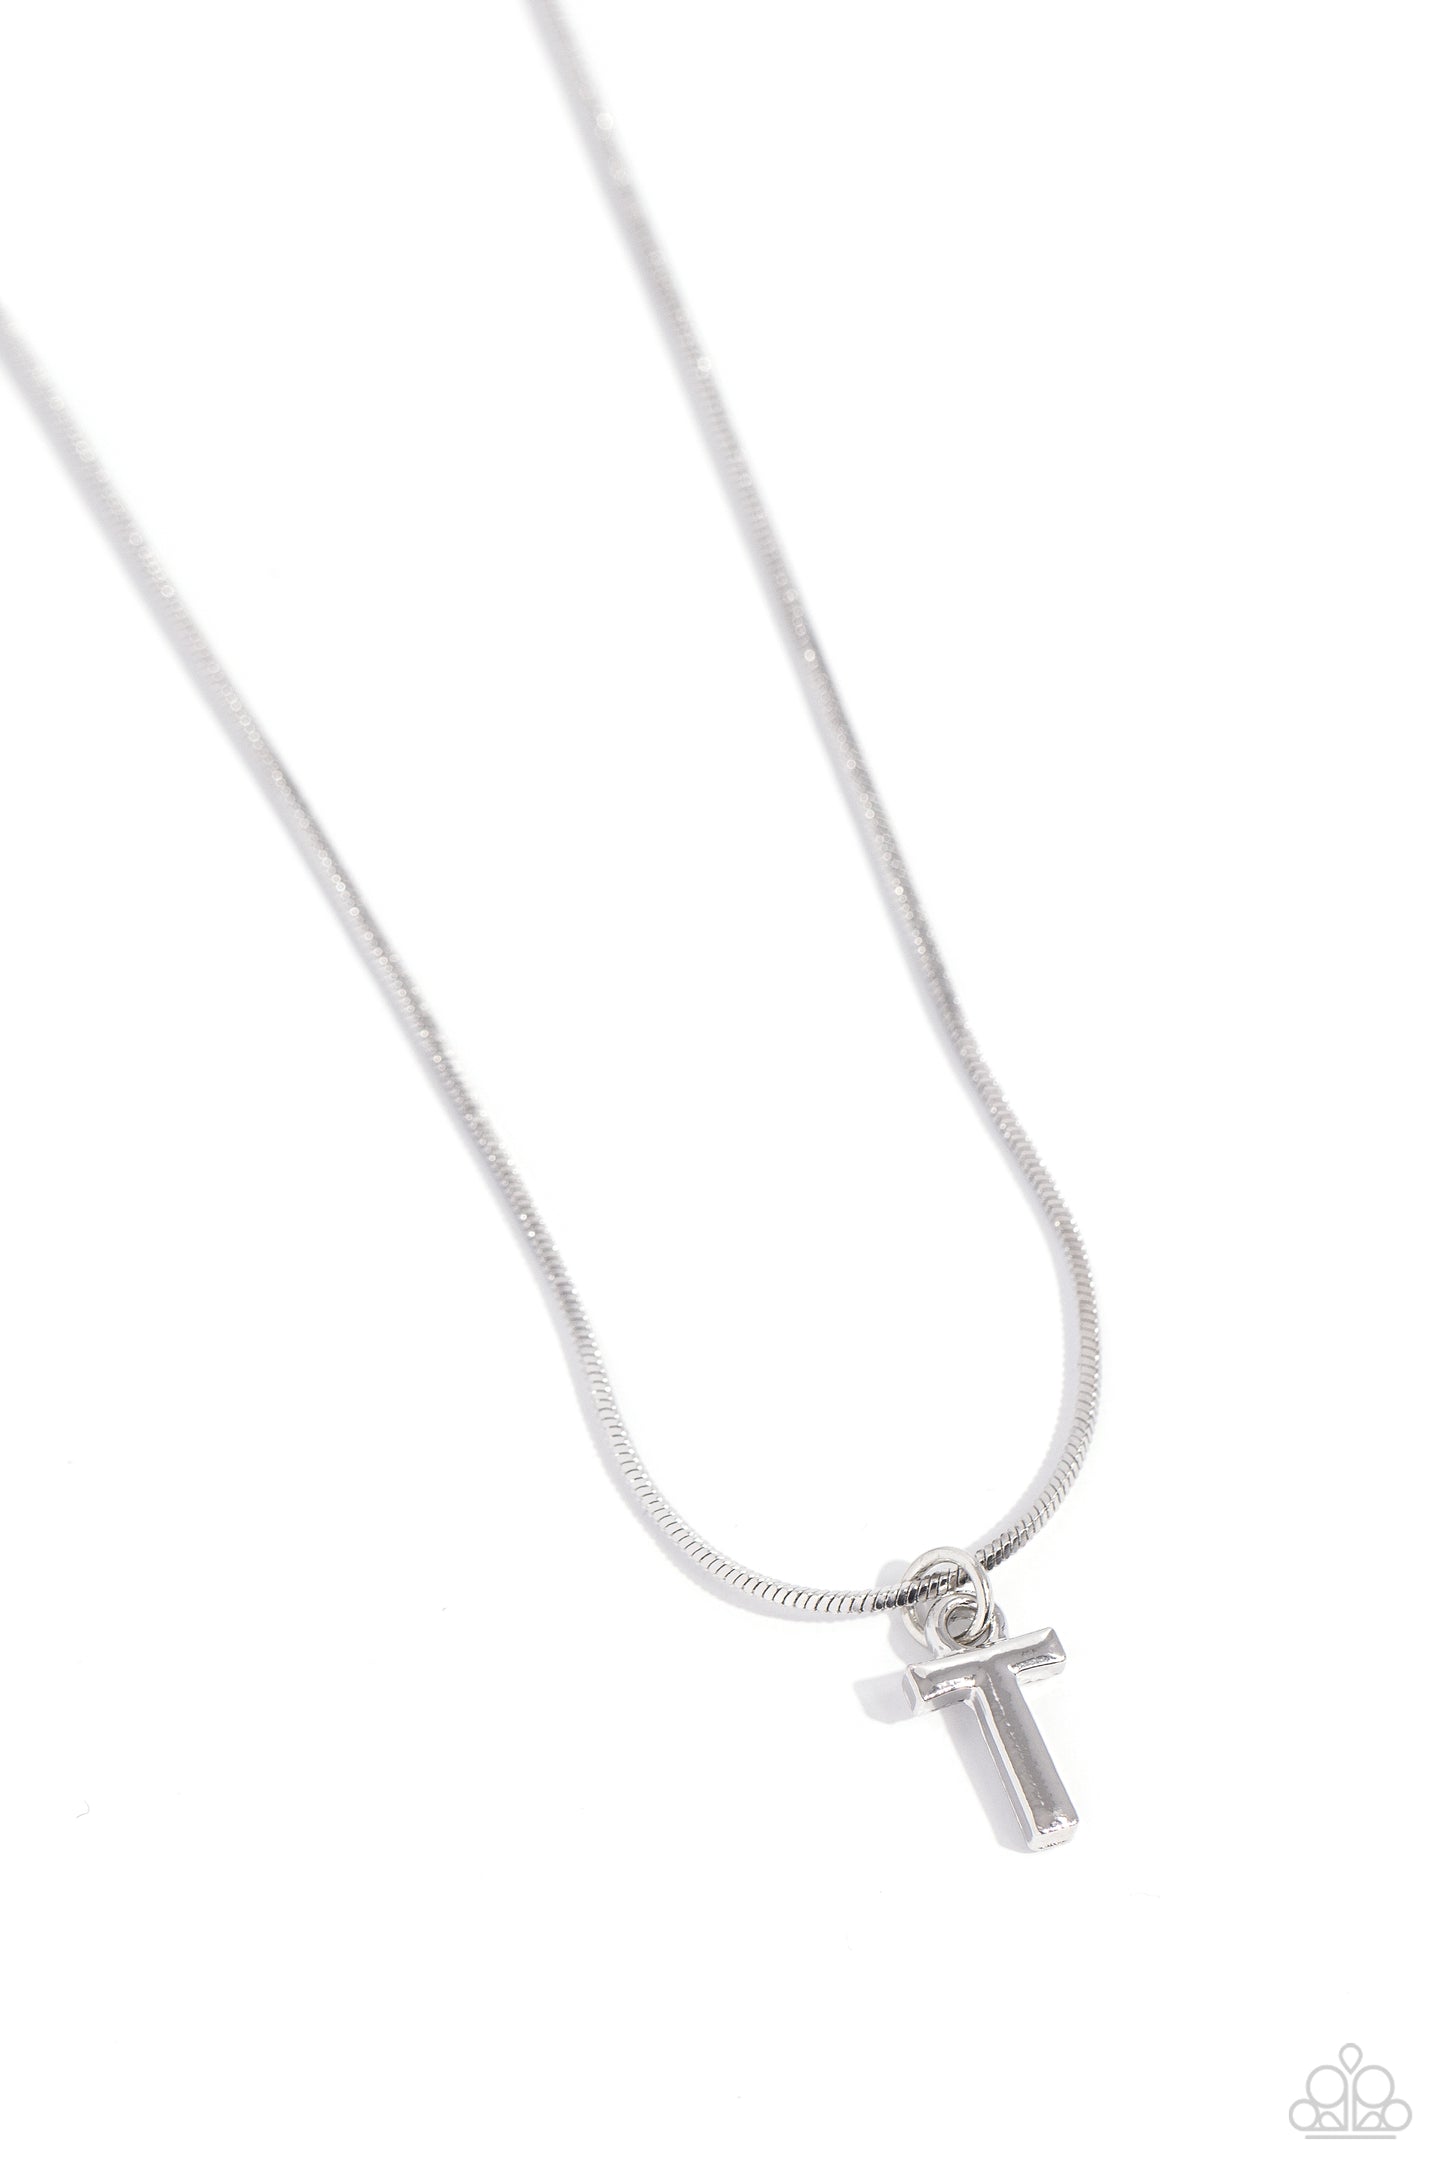 Seize the Initial Paparazzi Accessories Necklaces with Earrings Silver - T